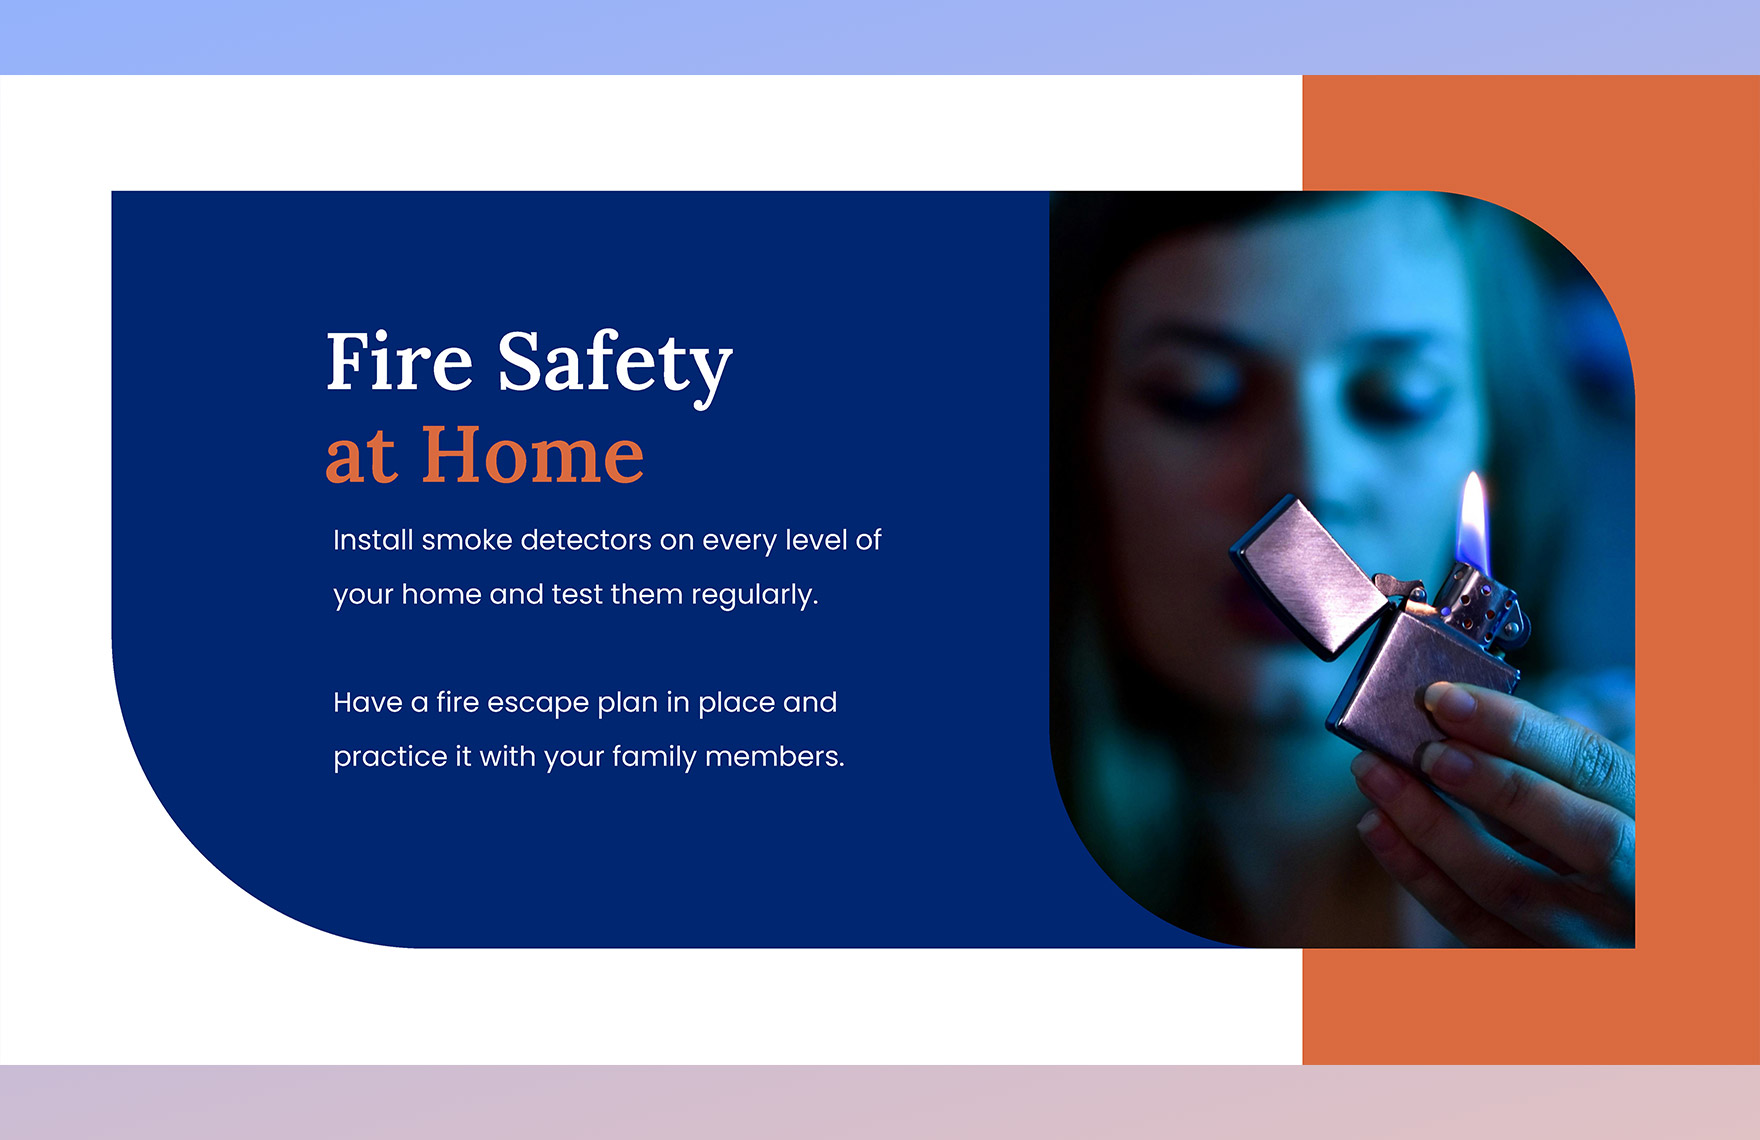 Health and Safety in Daily Life Google Slides Template